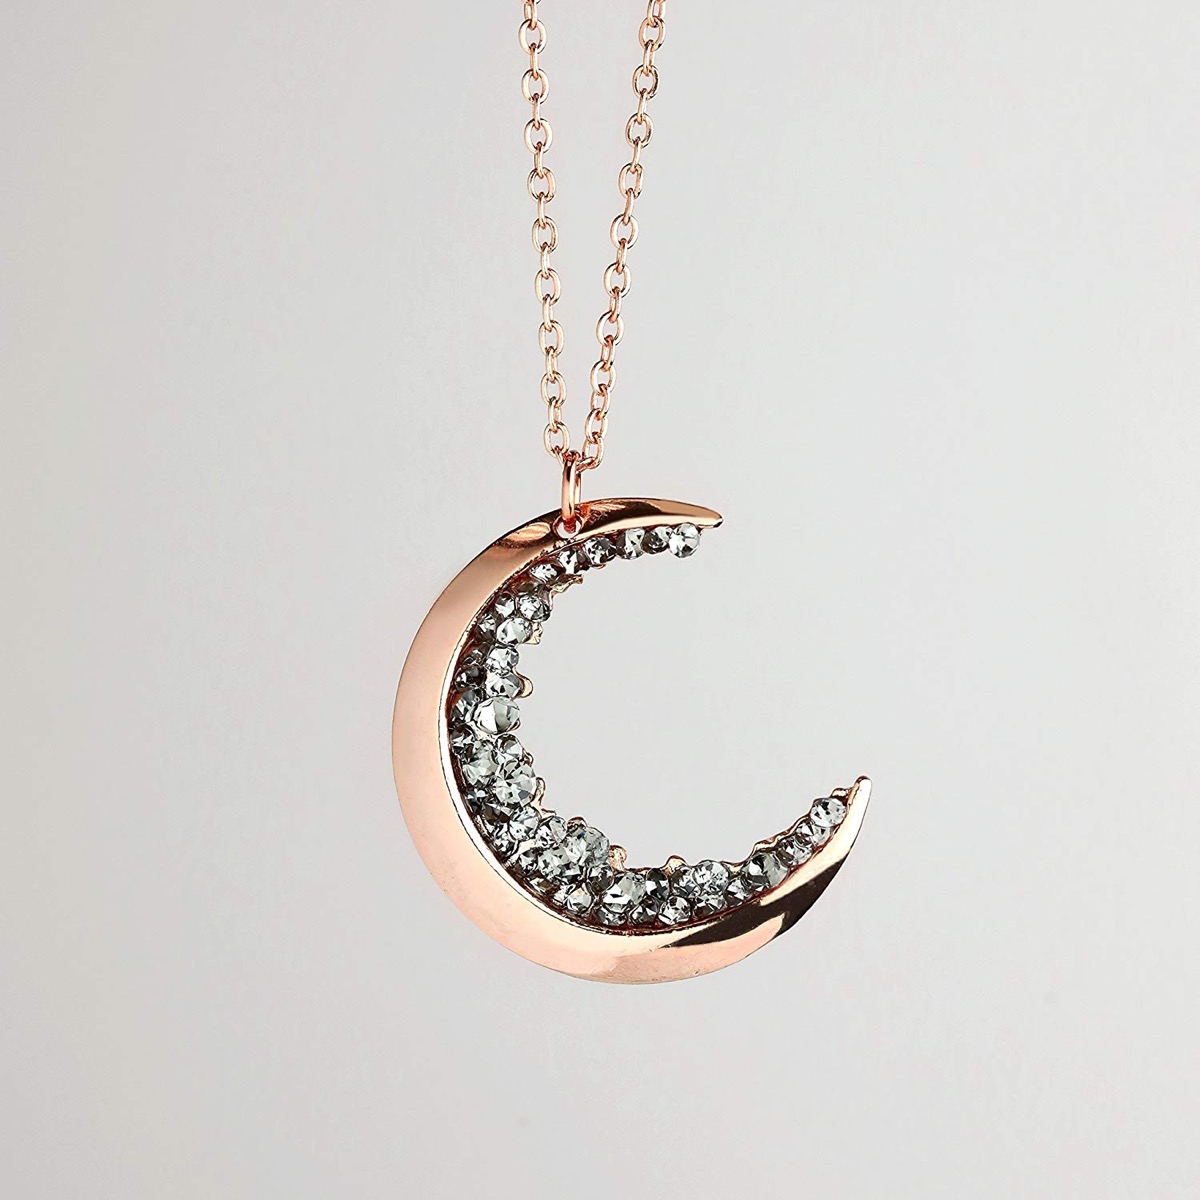 Crescent Moon Necklace {Handmade Items From Amazon}